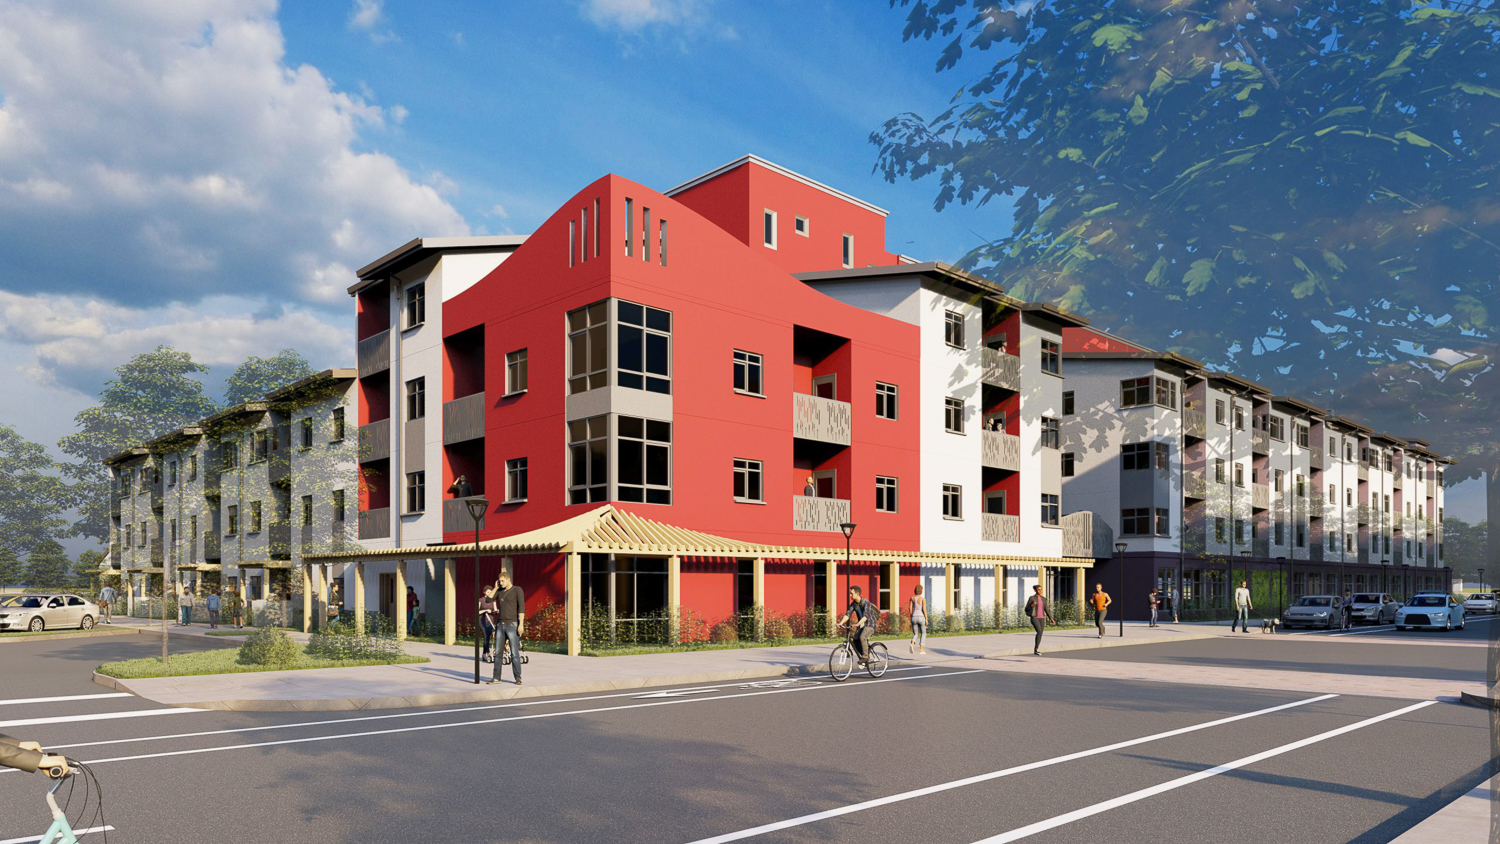 Casa Roseland Family Apartments, rendering by VMWP Architects